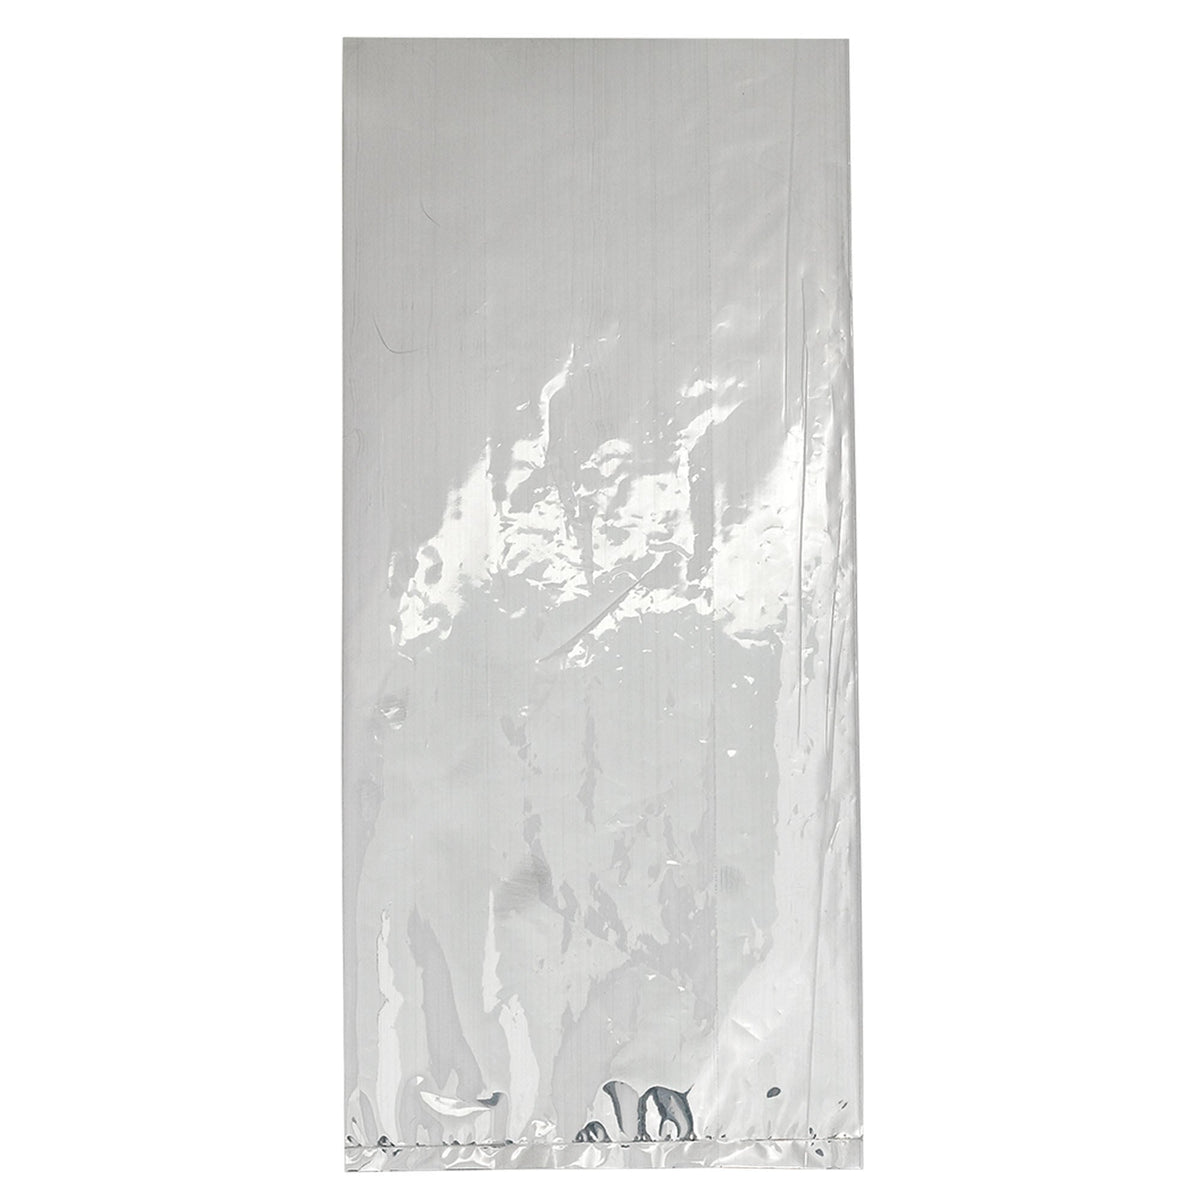 Silver Foil 9 1/2"H x 4"W x 2"D Party Bags package of 25